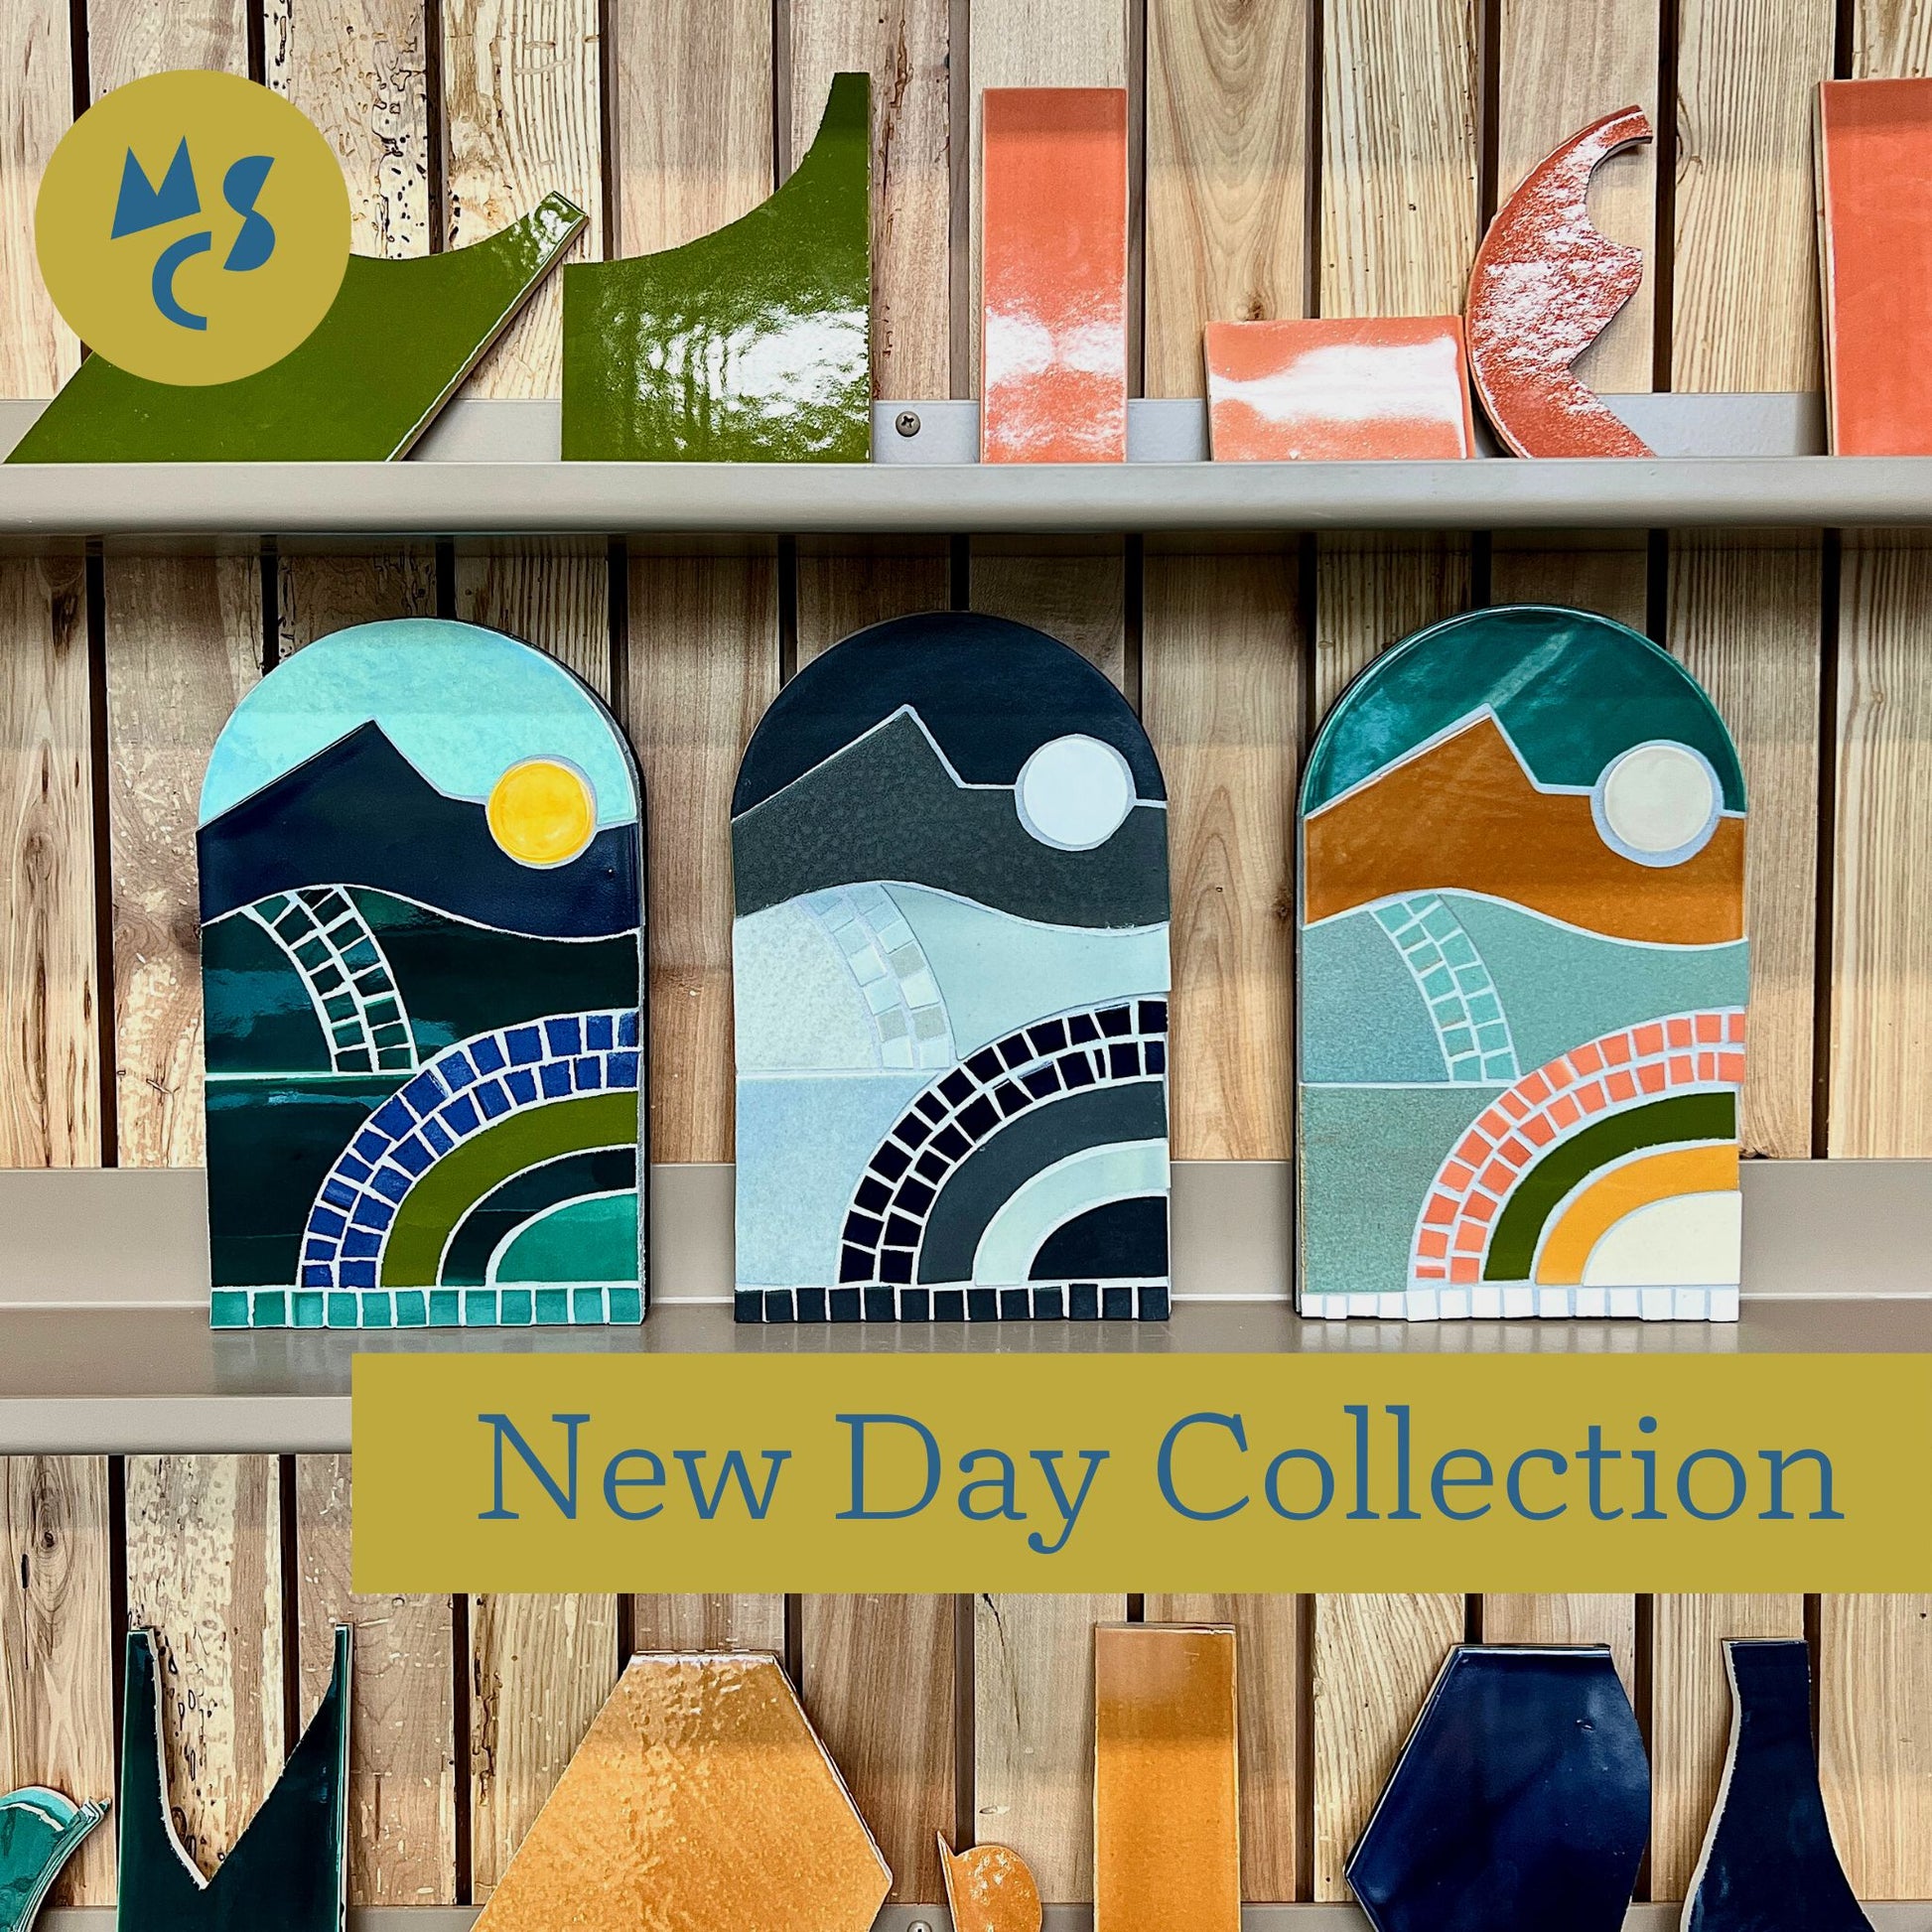 New Day Mosaic Kit Collection of all three colors with upcycled tile pieces on shelving